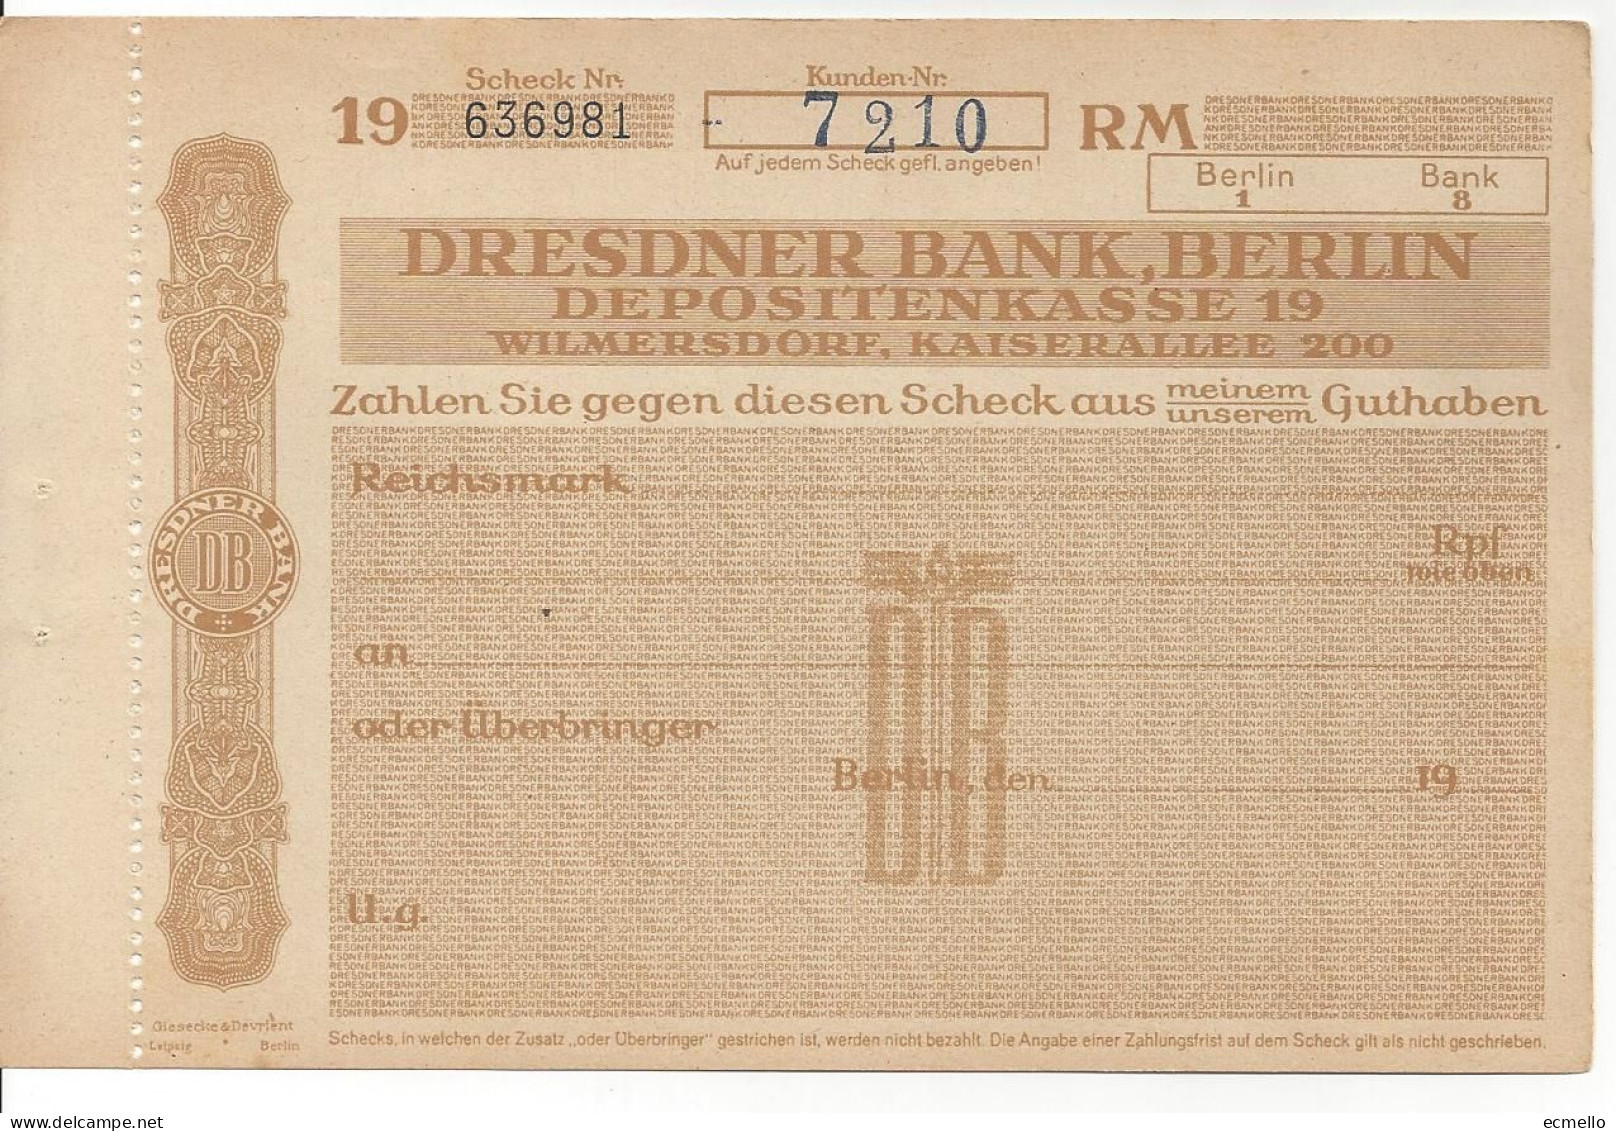 GERMANY CHEQUE CHECK DRESDNER BANK, BERLIN, 1930'S SCARCE - Chèques & Chèques De Voyage